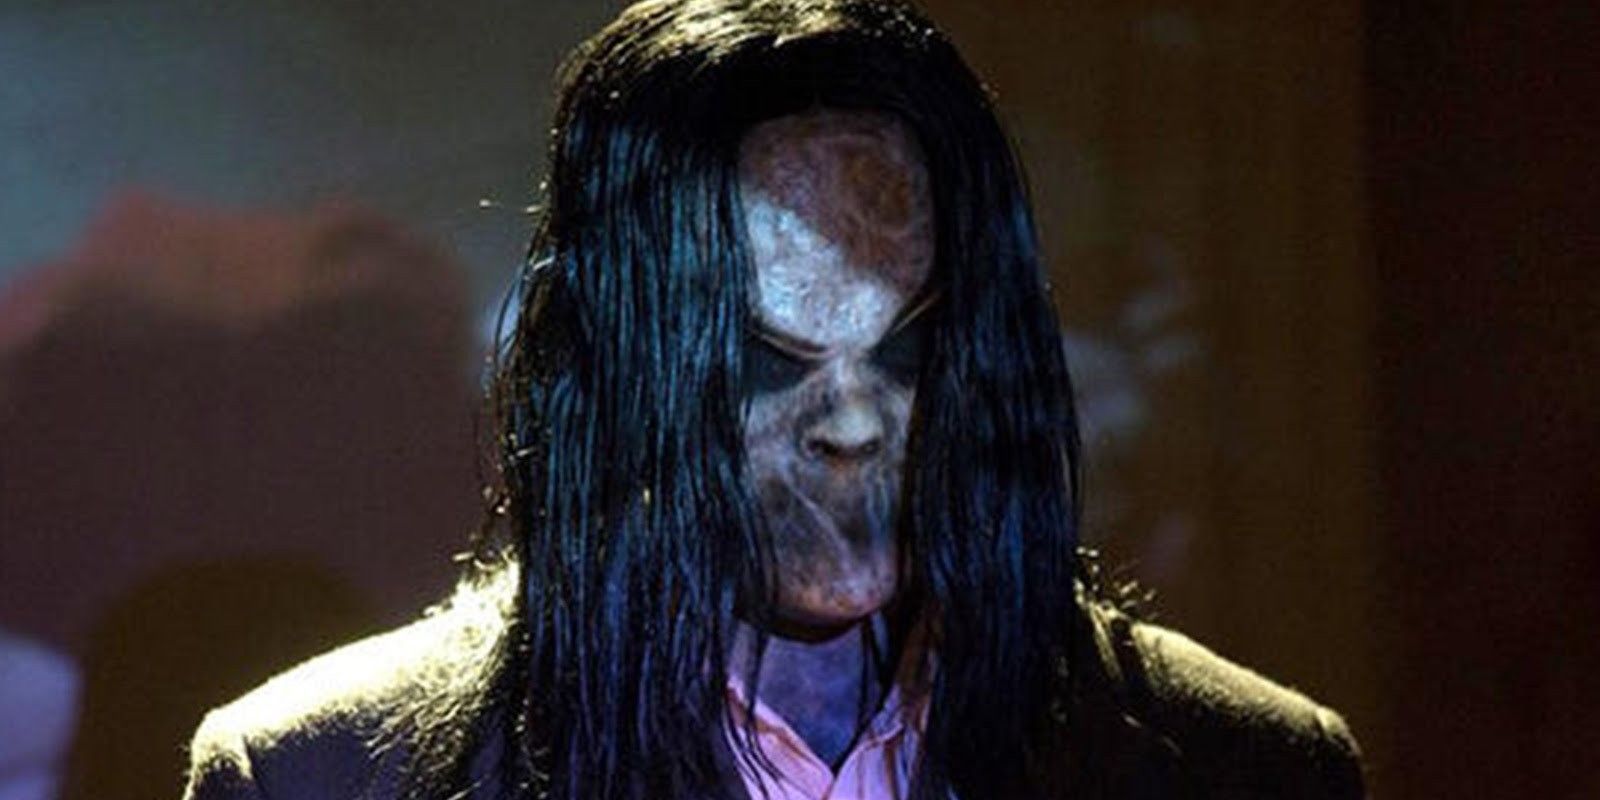 Bughuul as he appeared in Sinister 2